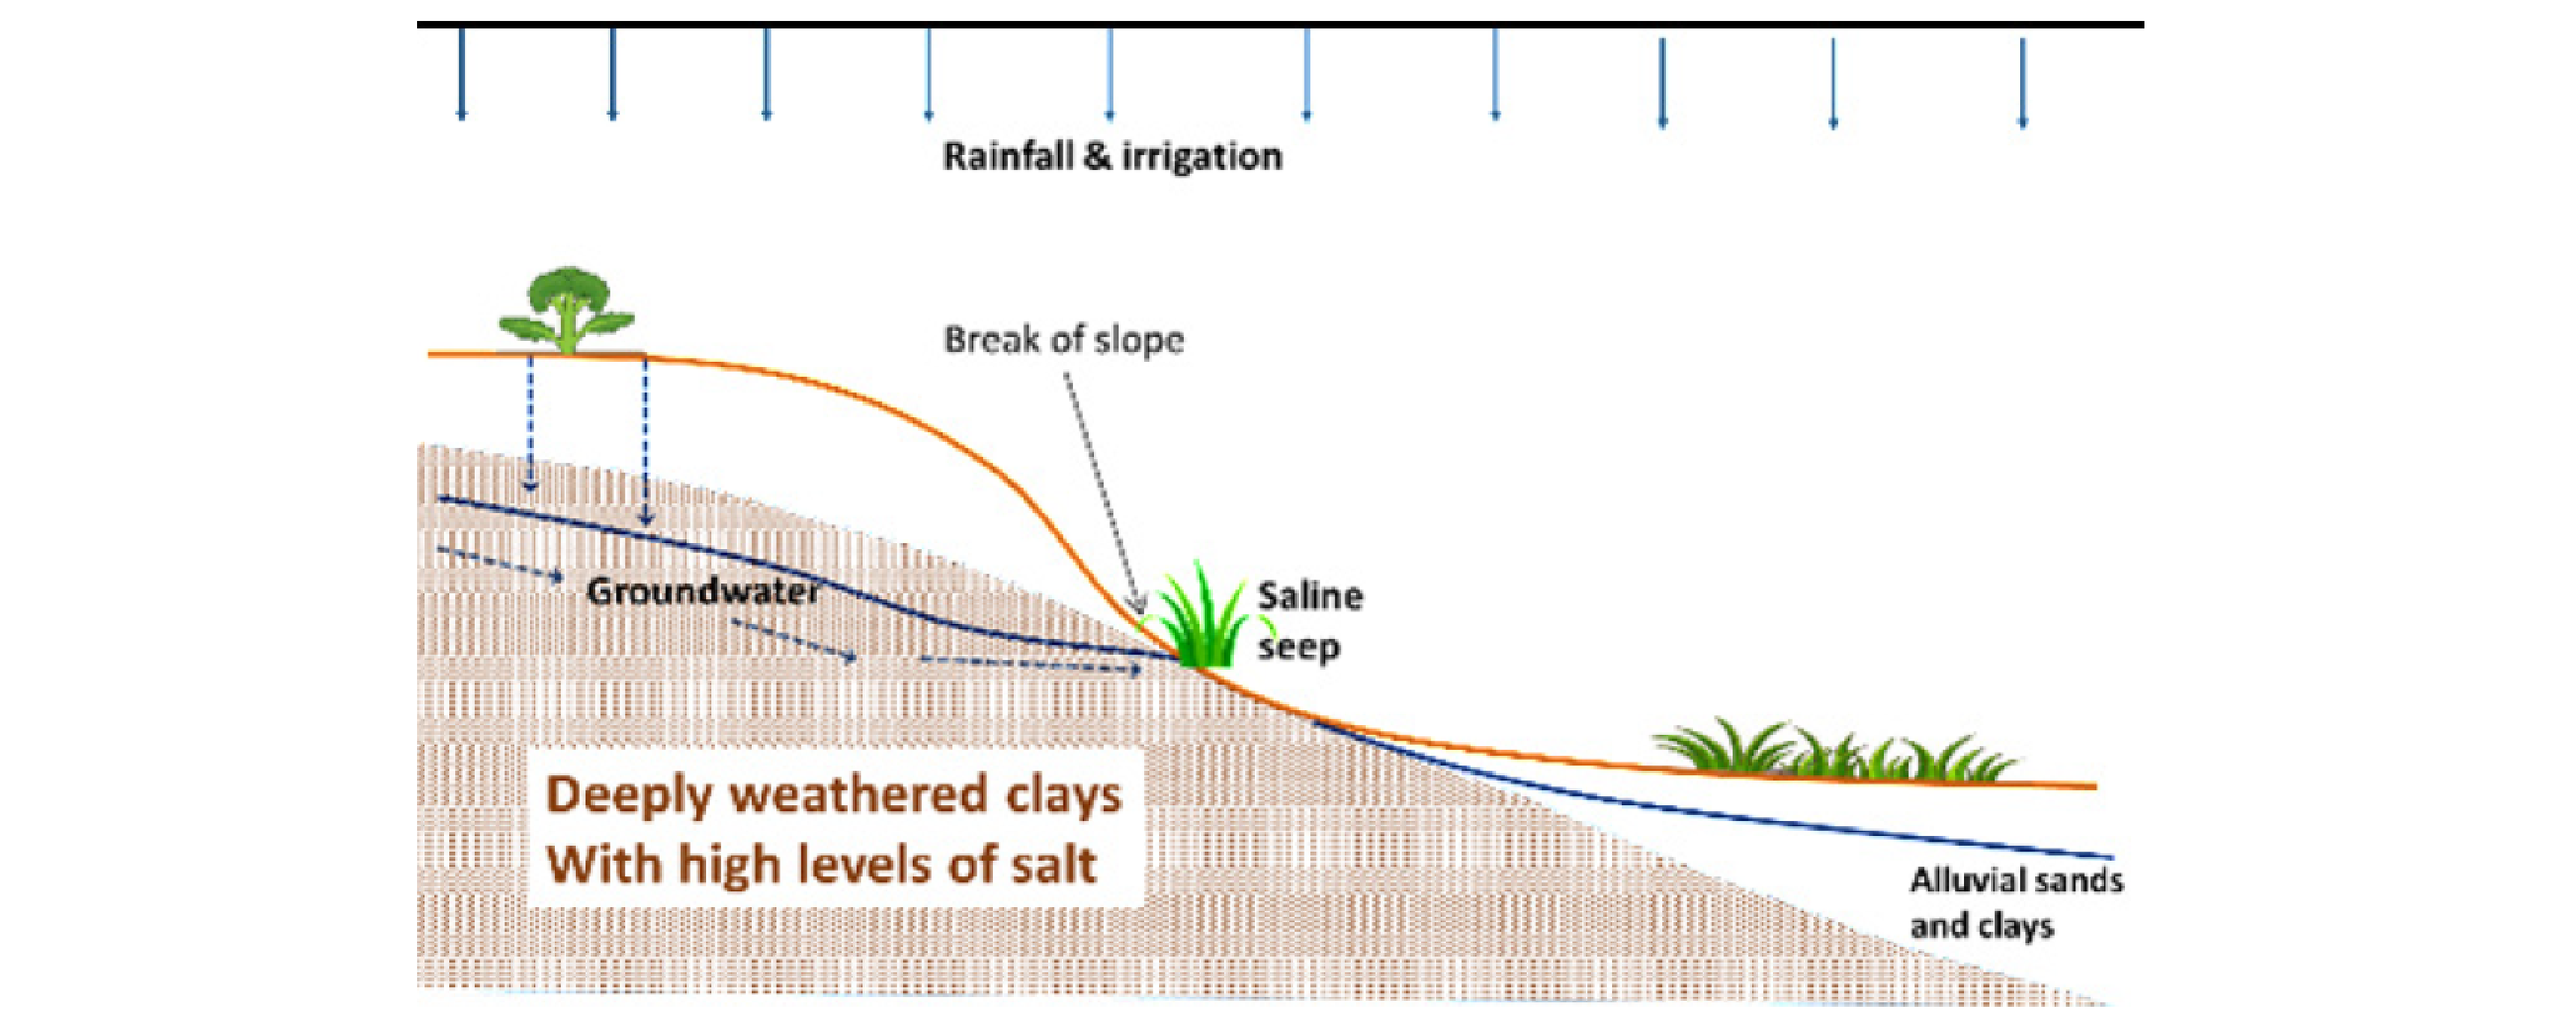 Figure 69. Cross section diagram showing outbreak of saline seepage areas at the break of slope.